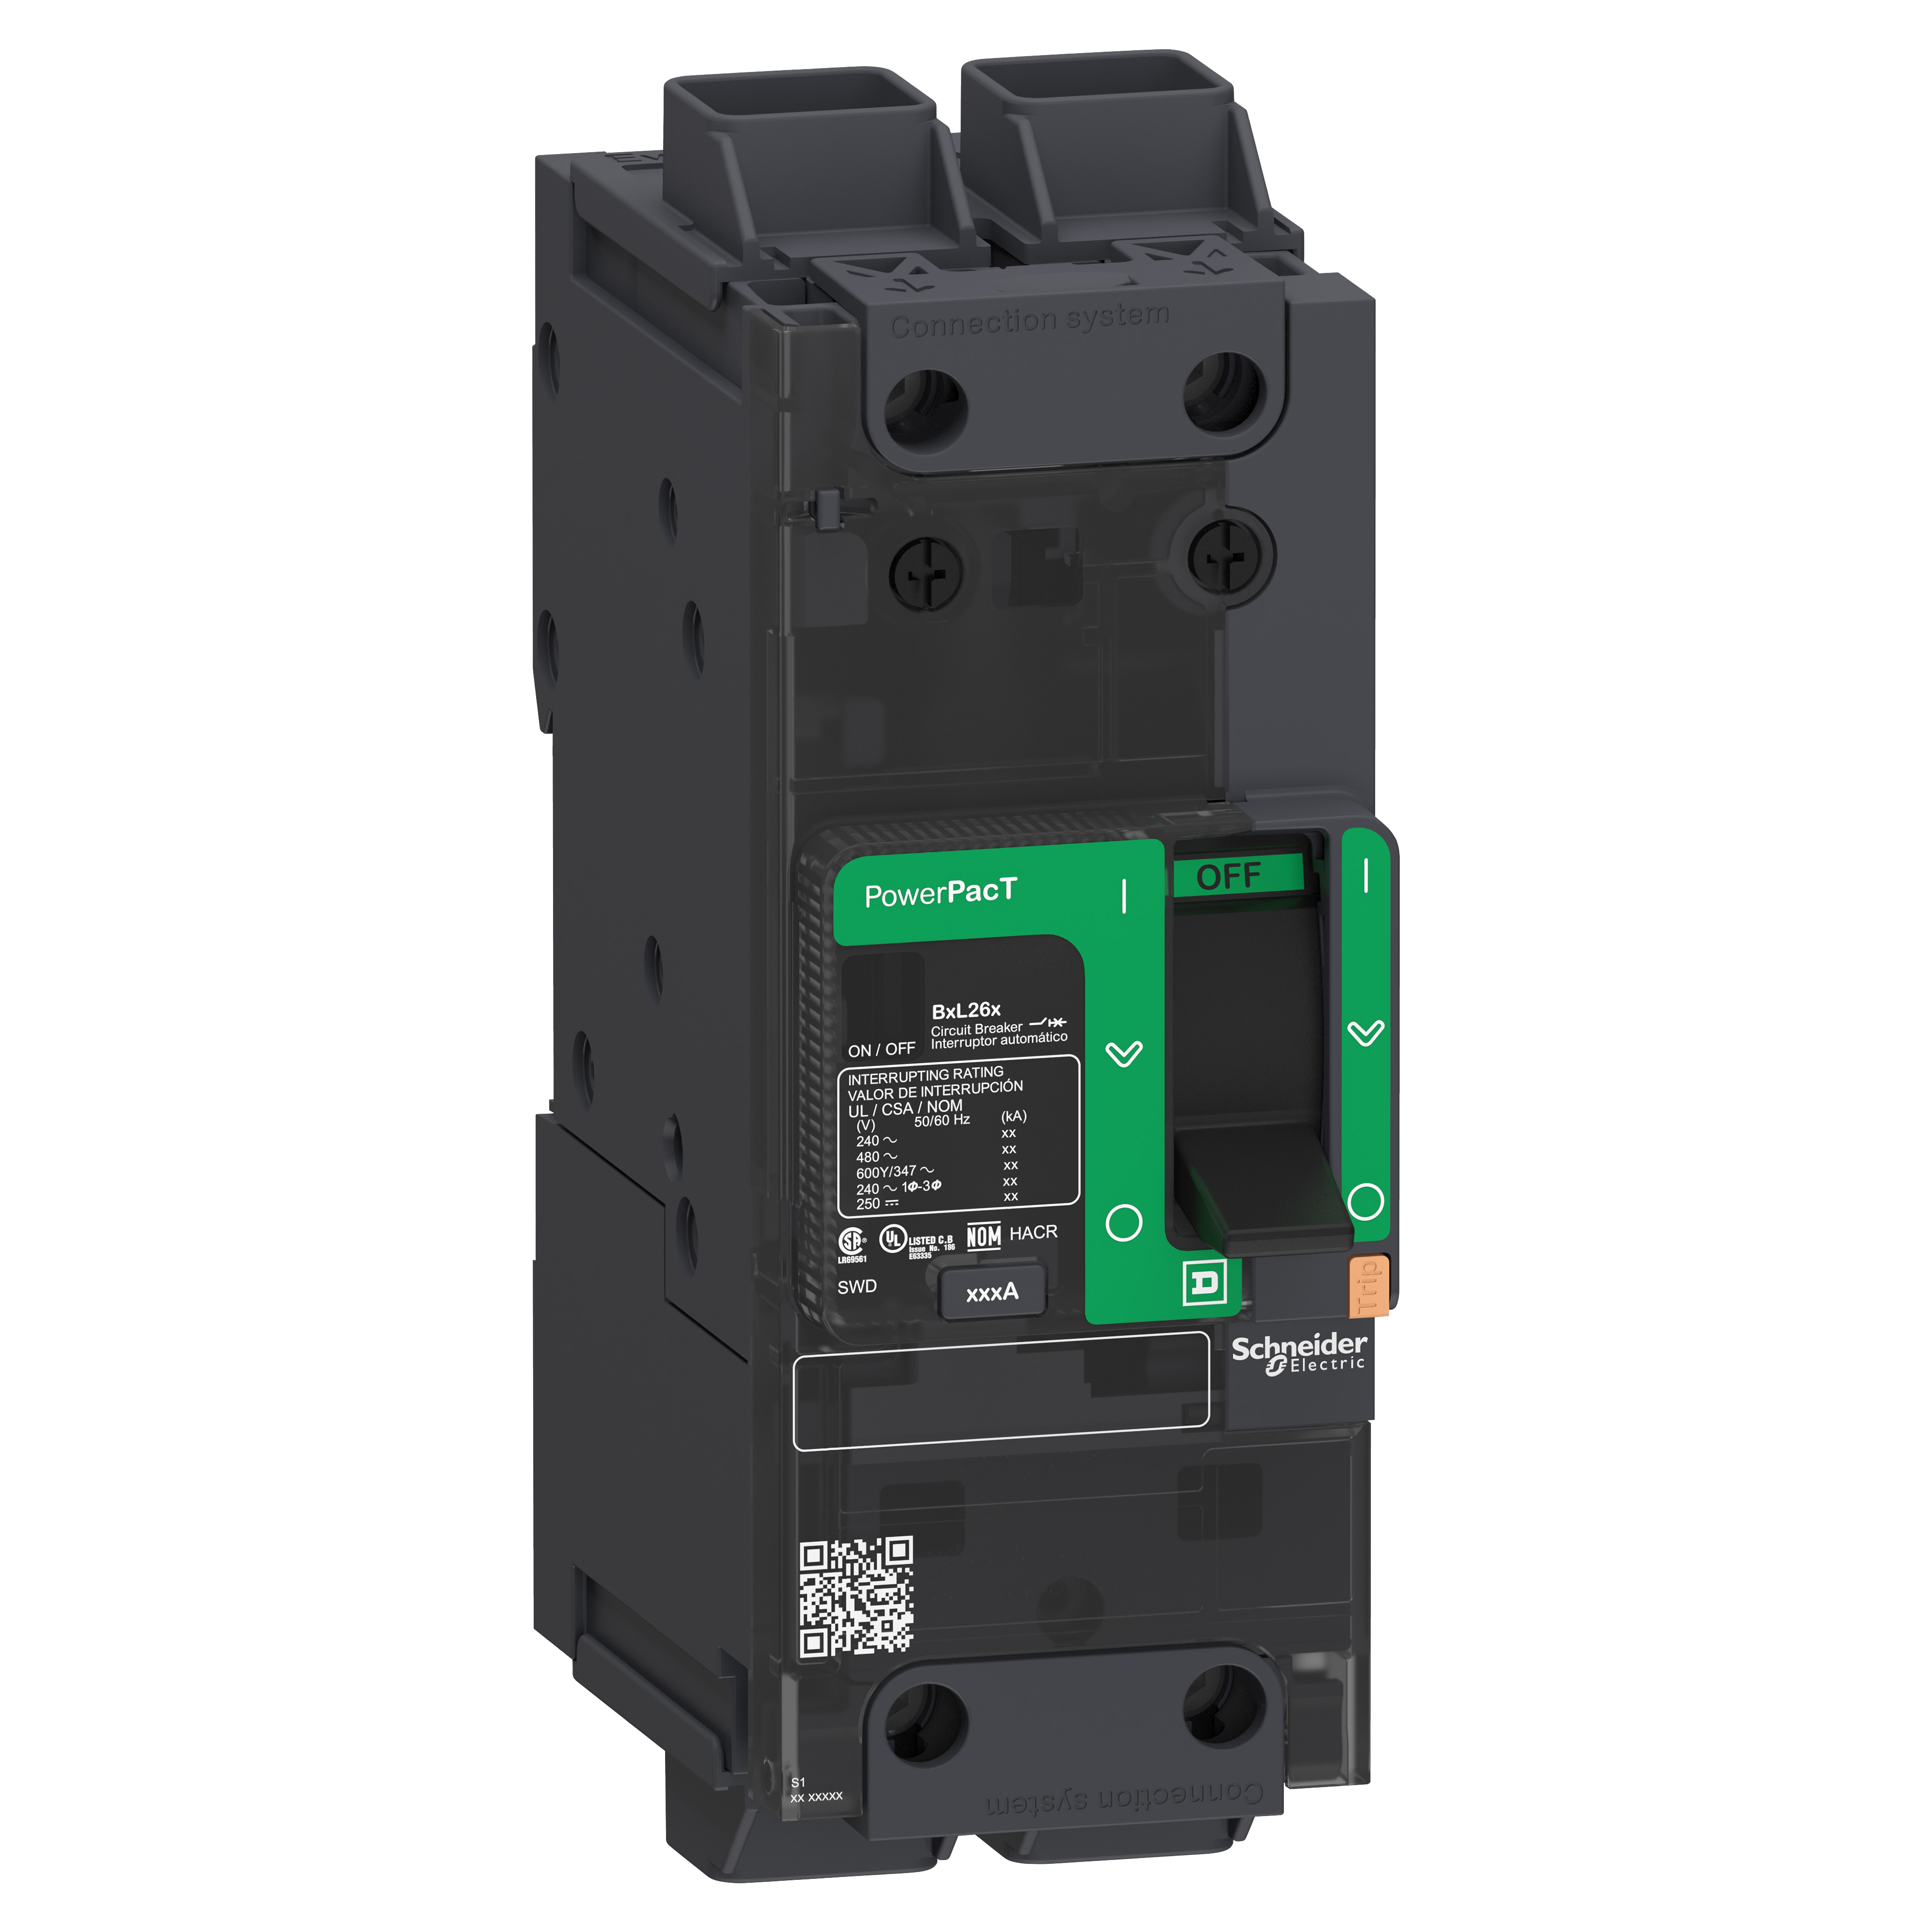 Circuit breaker, PowerPacT B, 40A, 2 pole, 600Y/347VAC, 18kA, lugs, thermal magnetic, 80%, control wire ON end